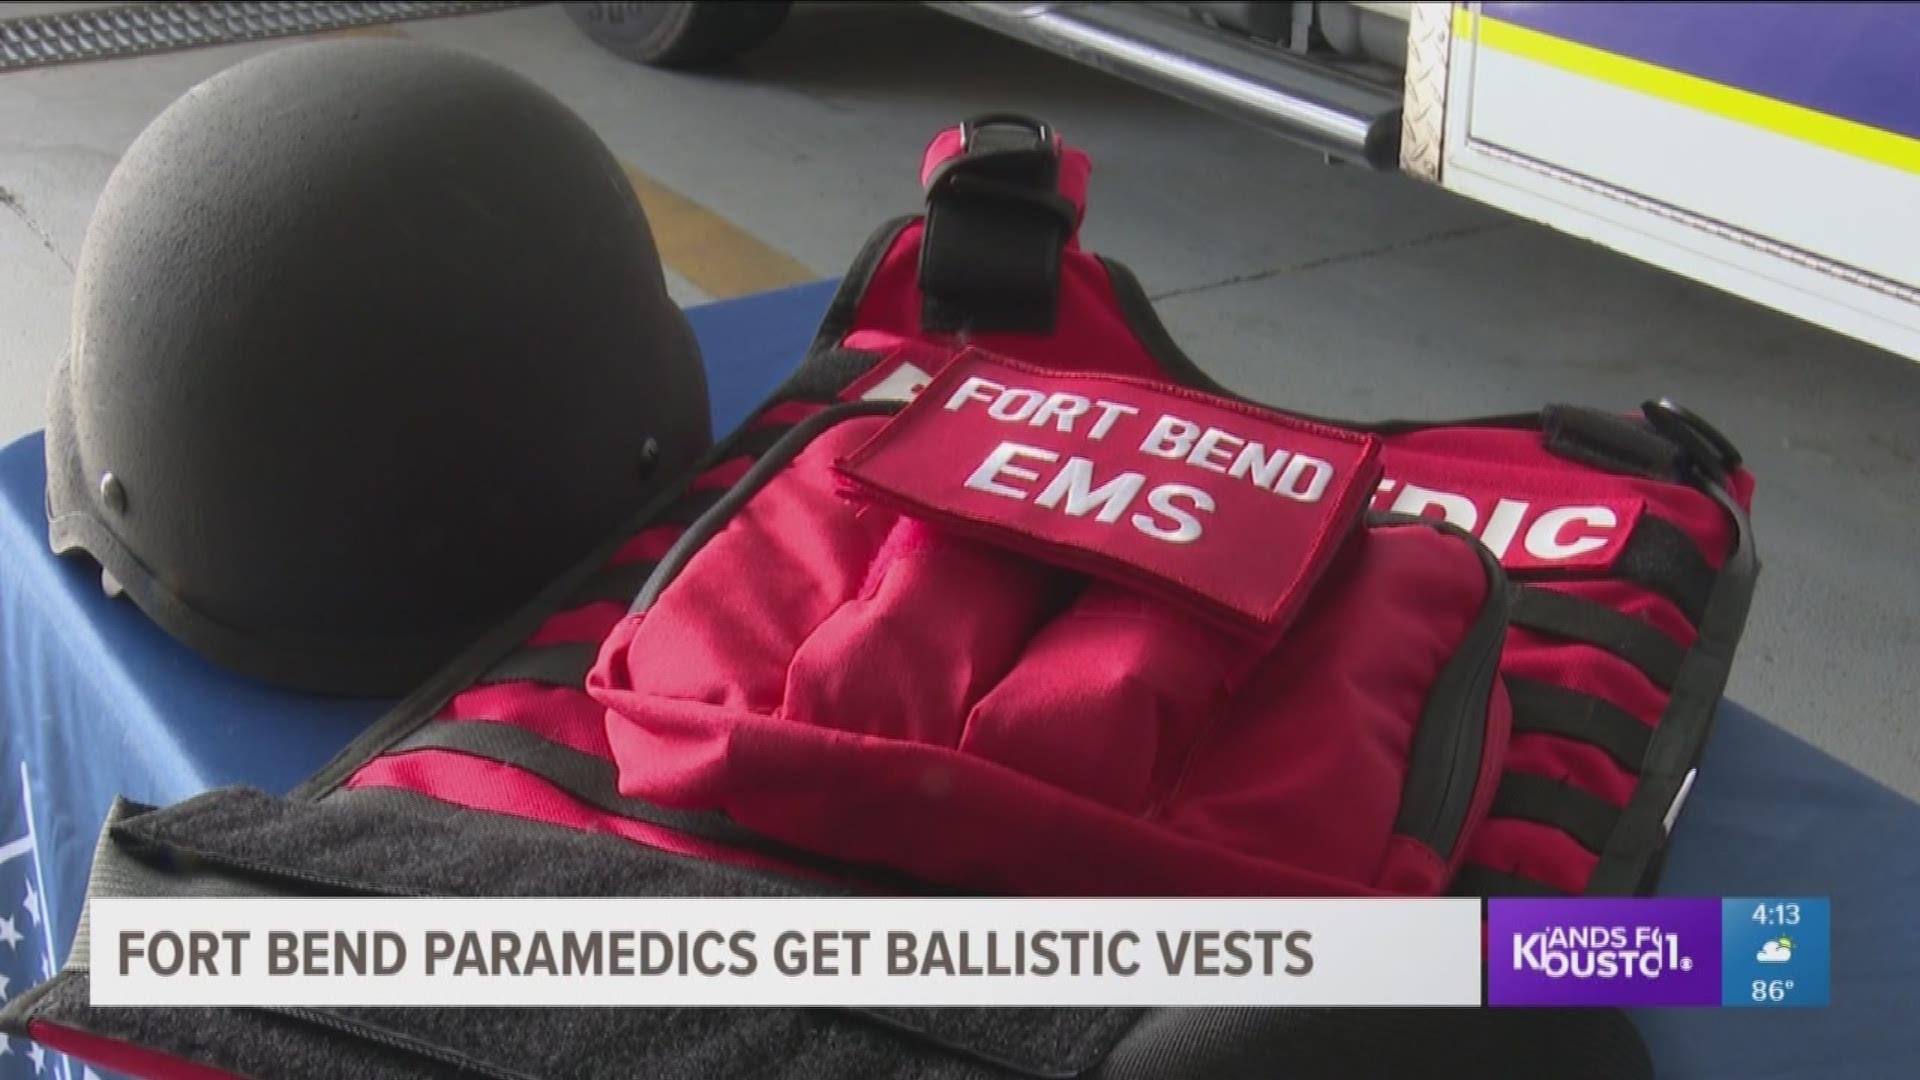 First responders in Fort Bend County are getting ballistic vests and helmets for protection.